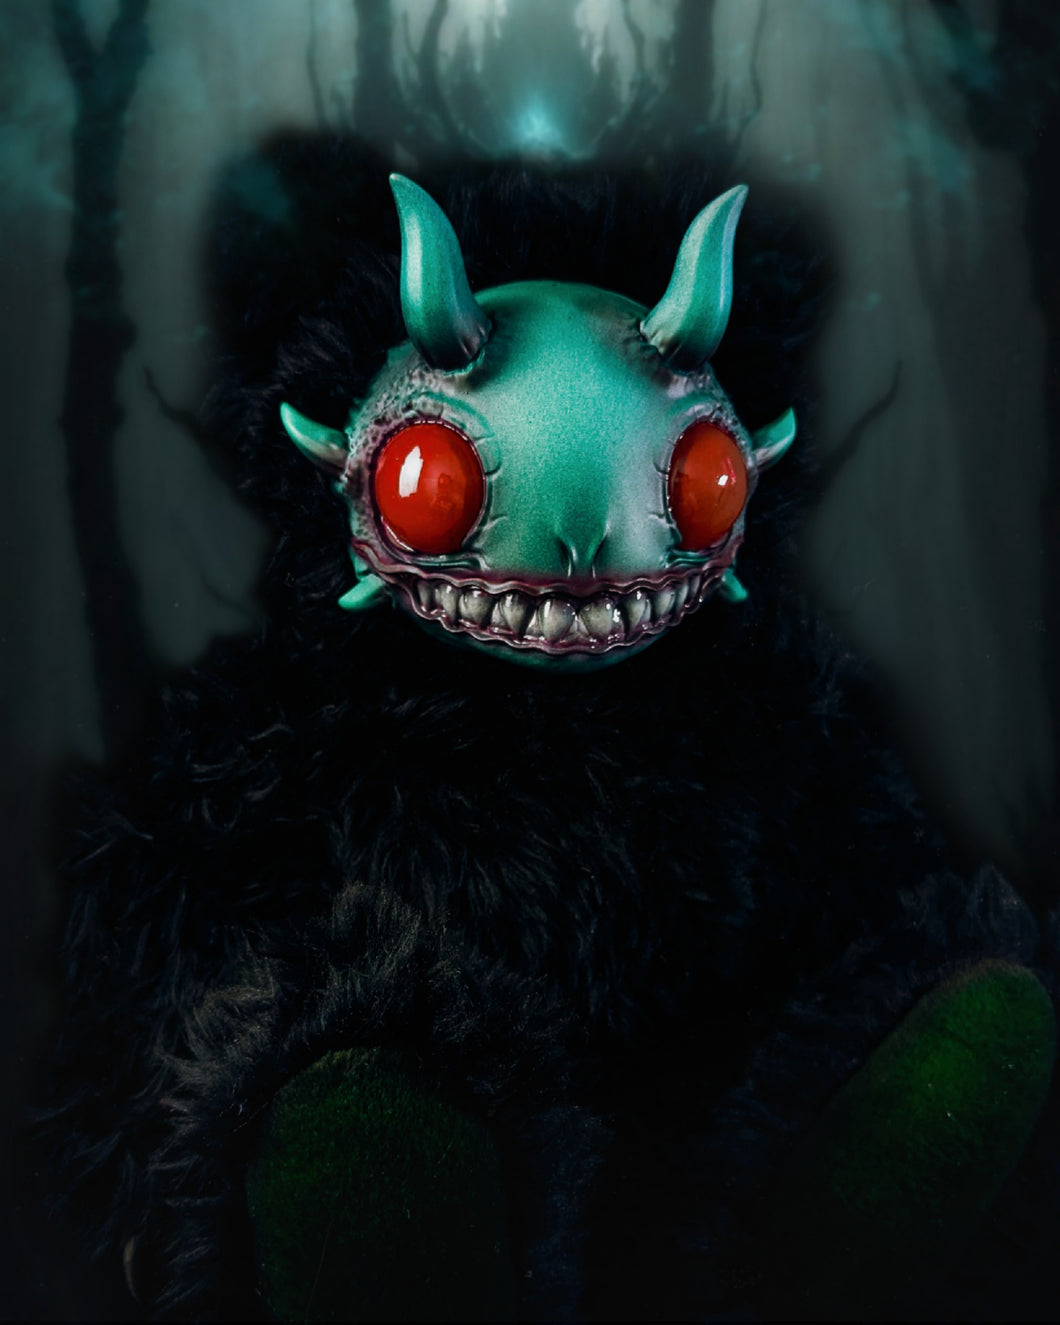 Oceanic Enigma: REEFUL - CRYPTCRITZ Handcrafted Deep Sea Demon Art Doll Plush Toy for Dark Enchantresses of the Abyss